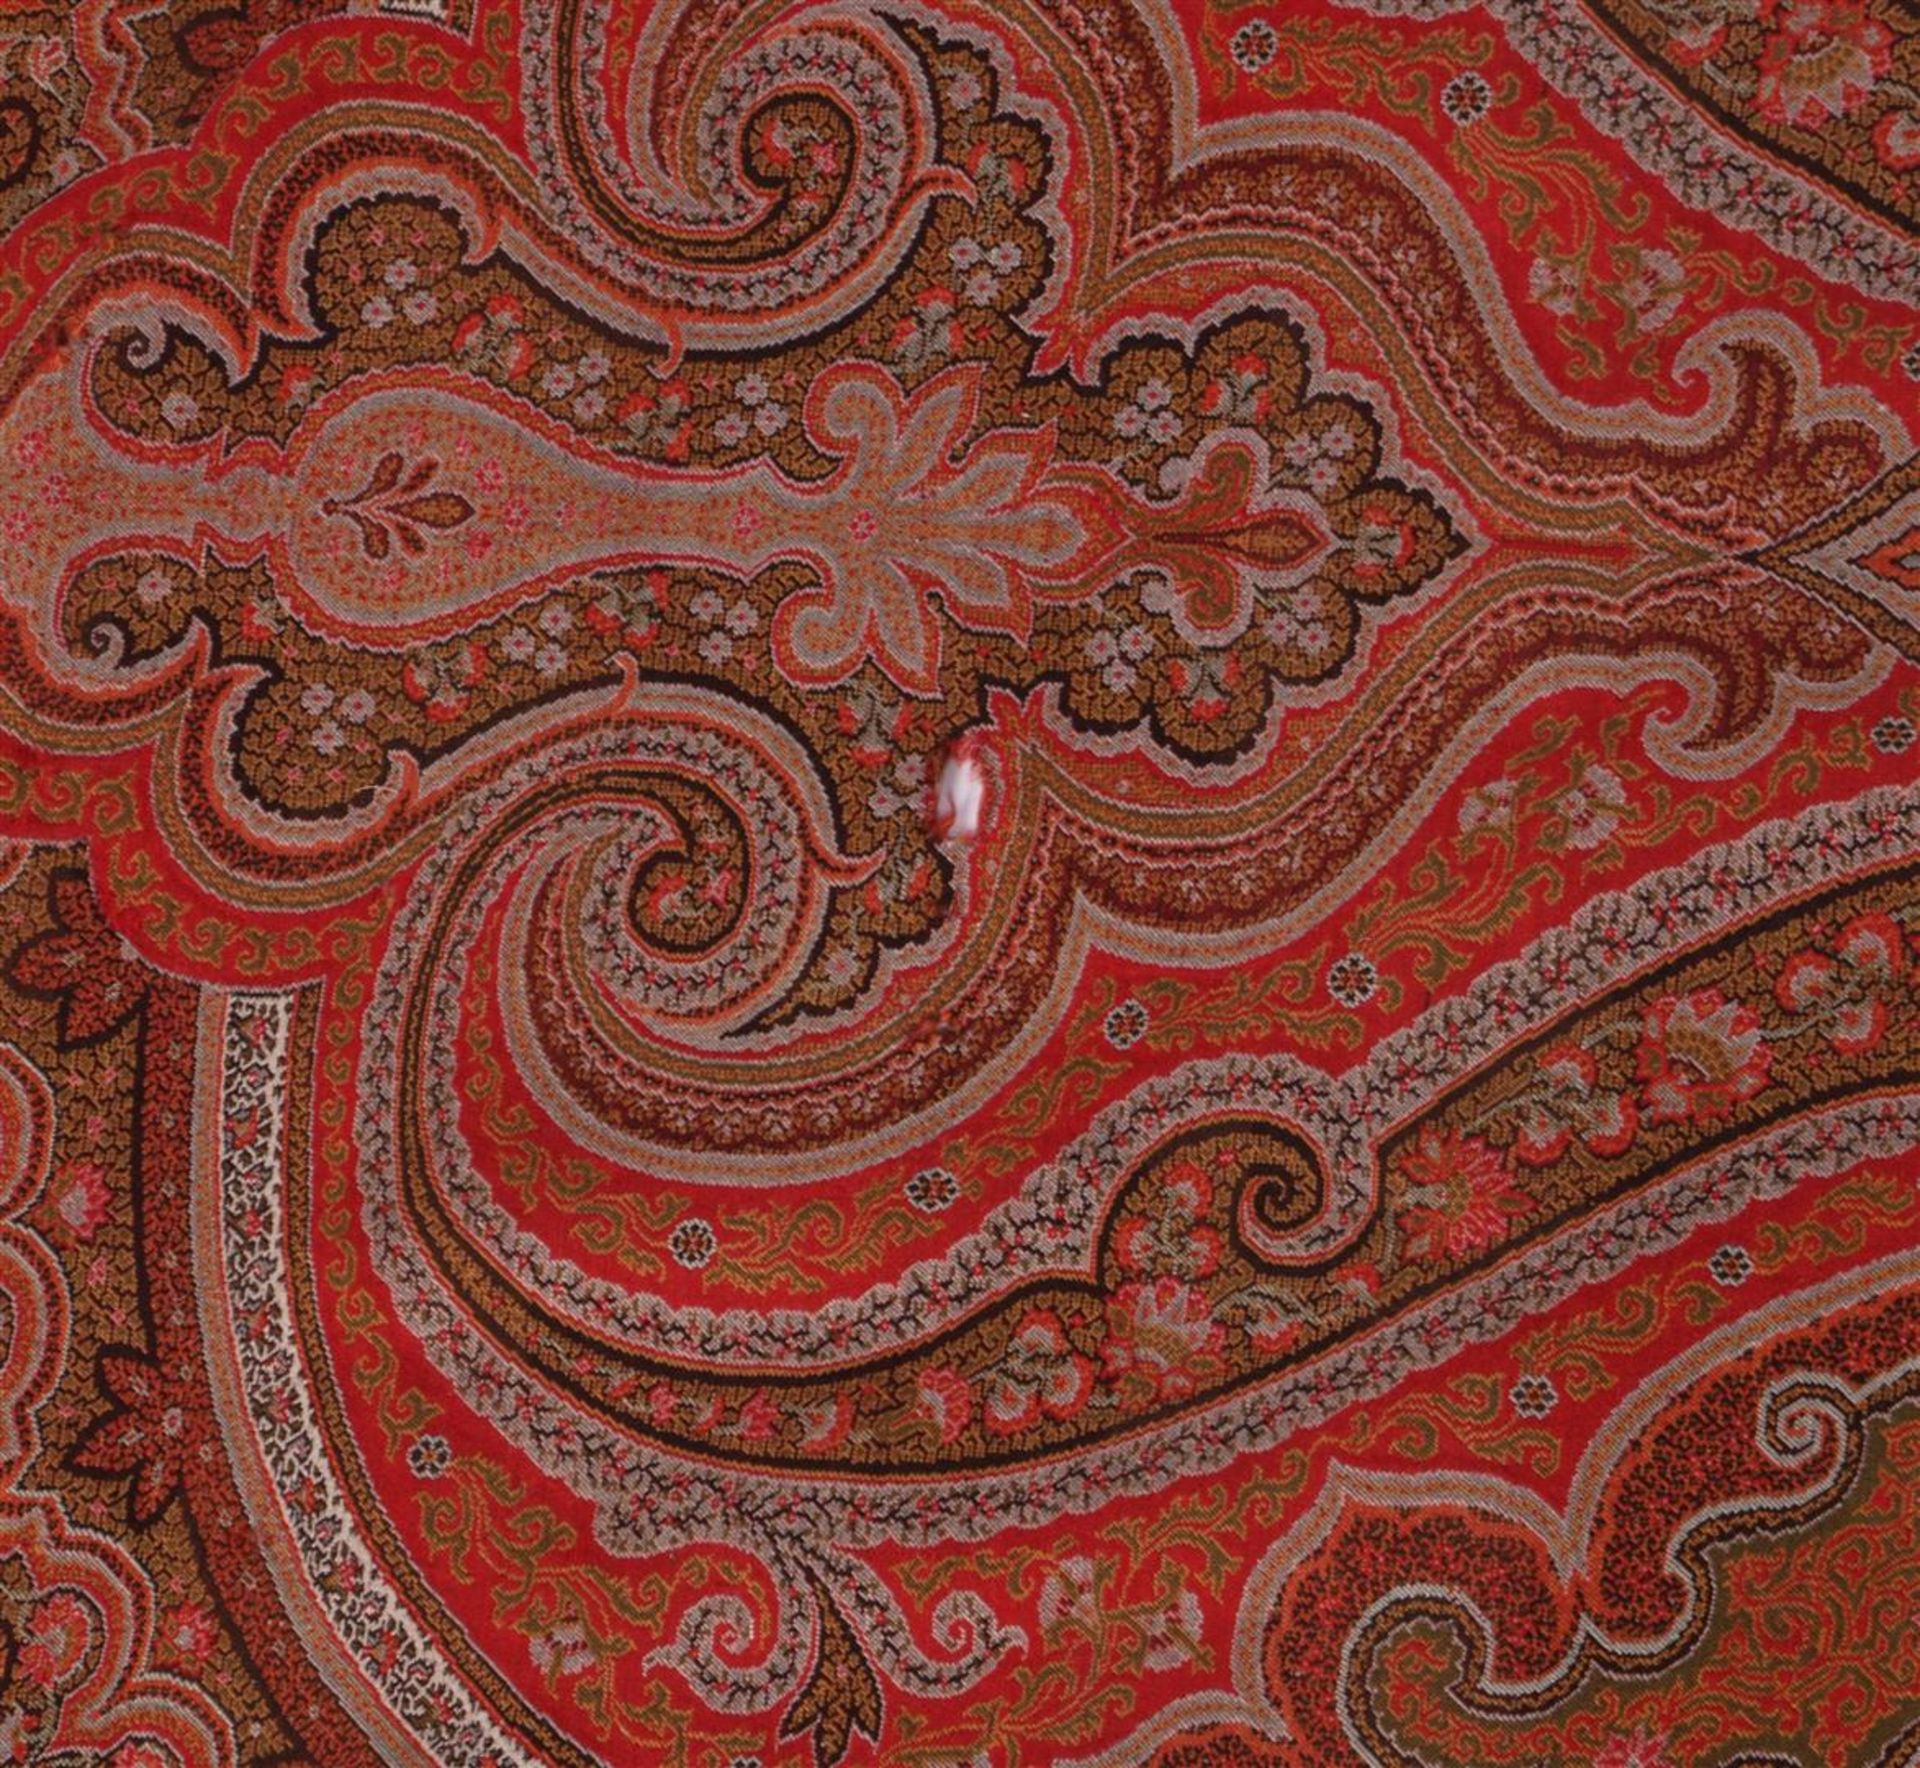 Woven cloth with oriental decor - Image 3 of 5